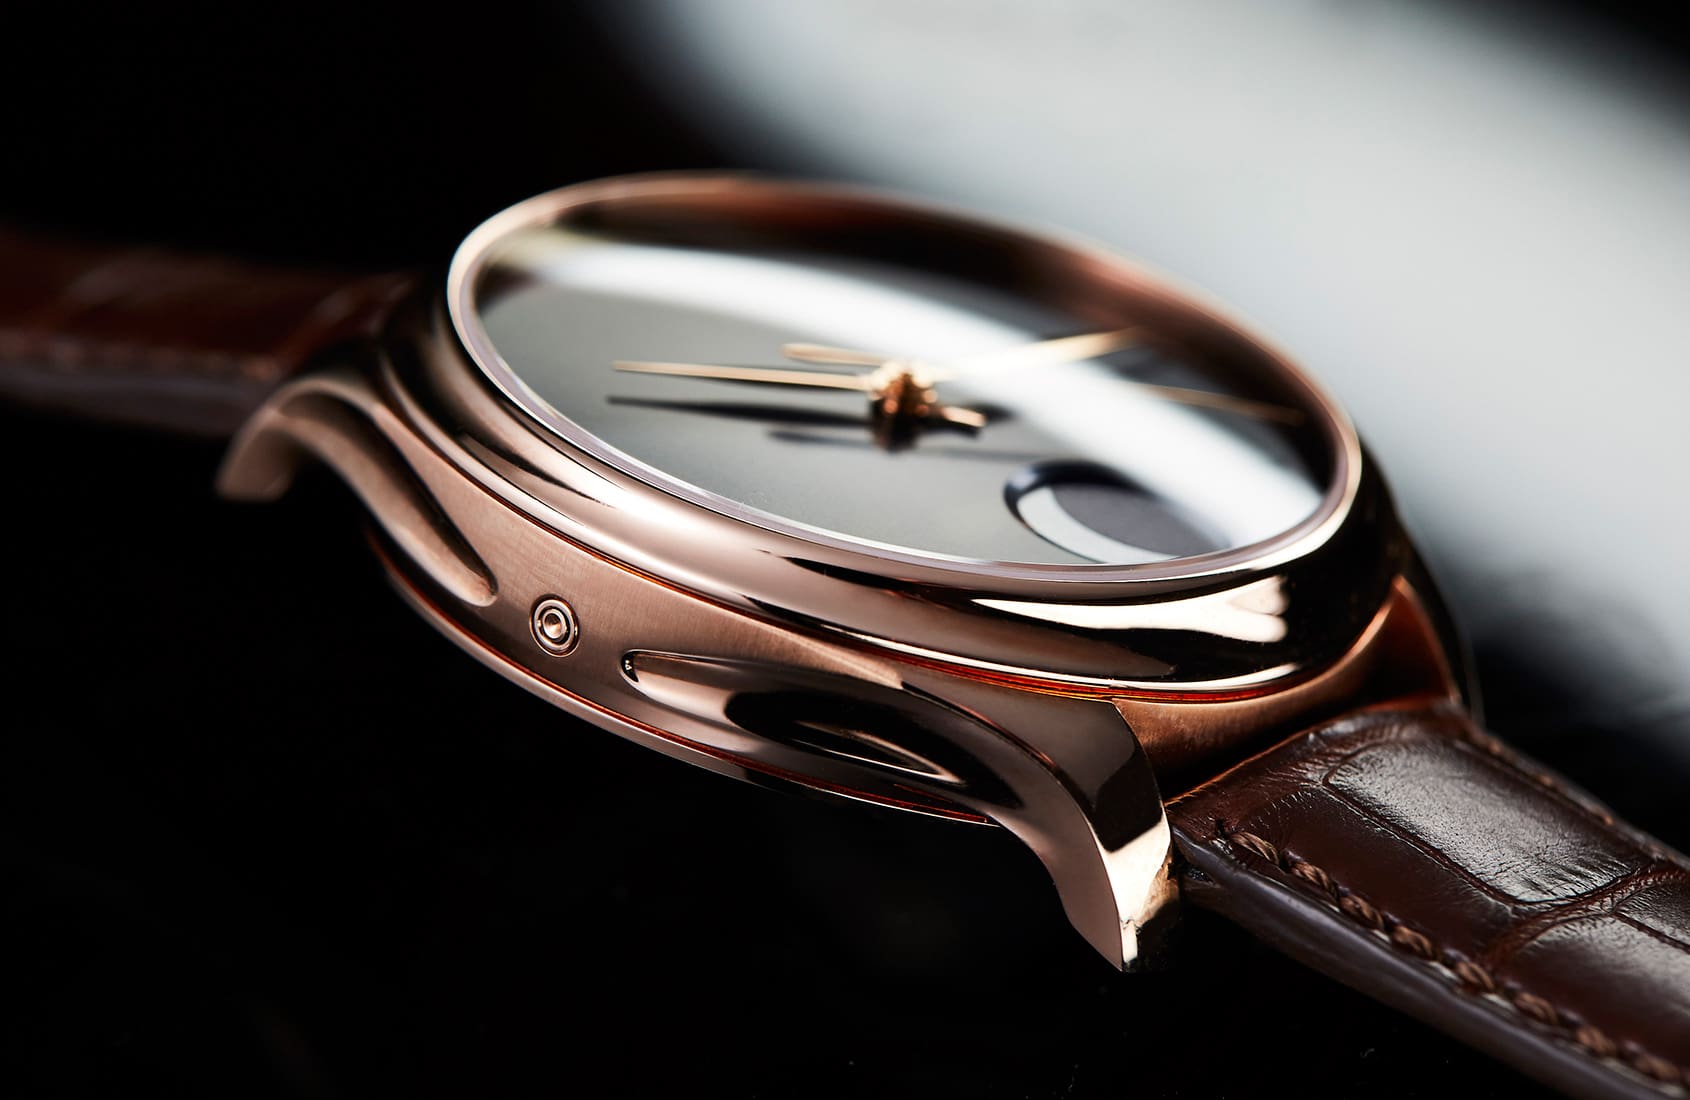 Behold, the Moser Endeavour Perpetual Moon concept in red gold